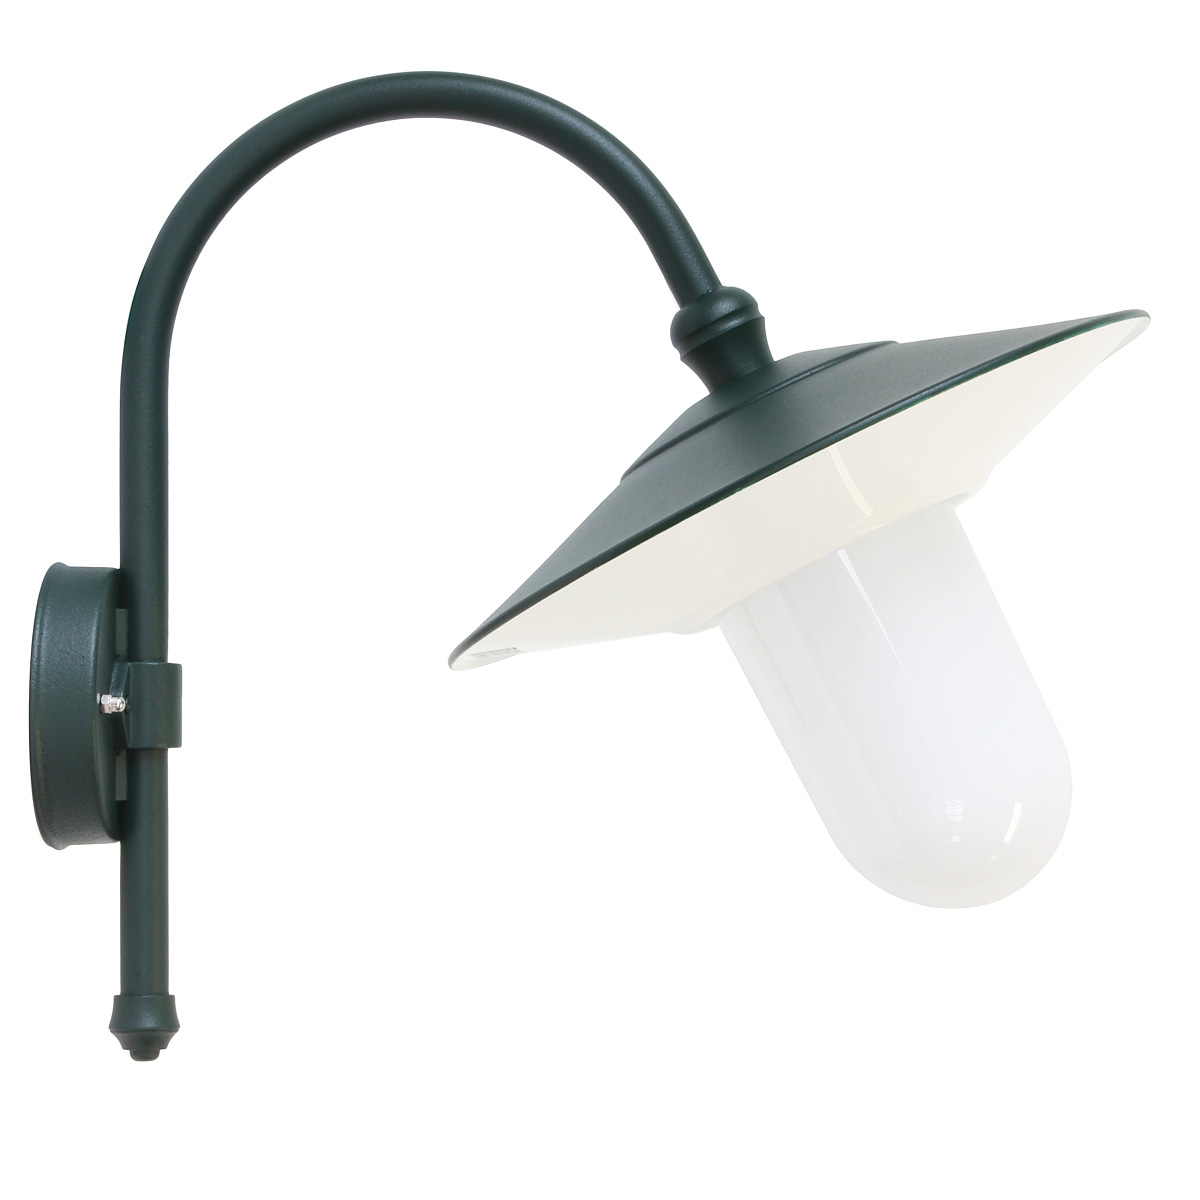 Forward-facing Wall Lamp for Outdoors with Glass